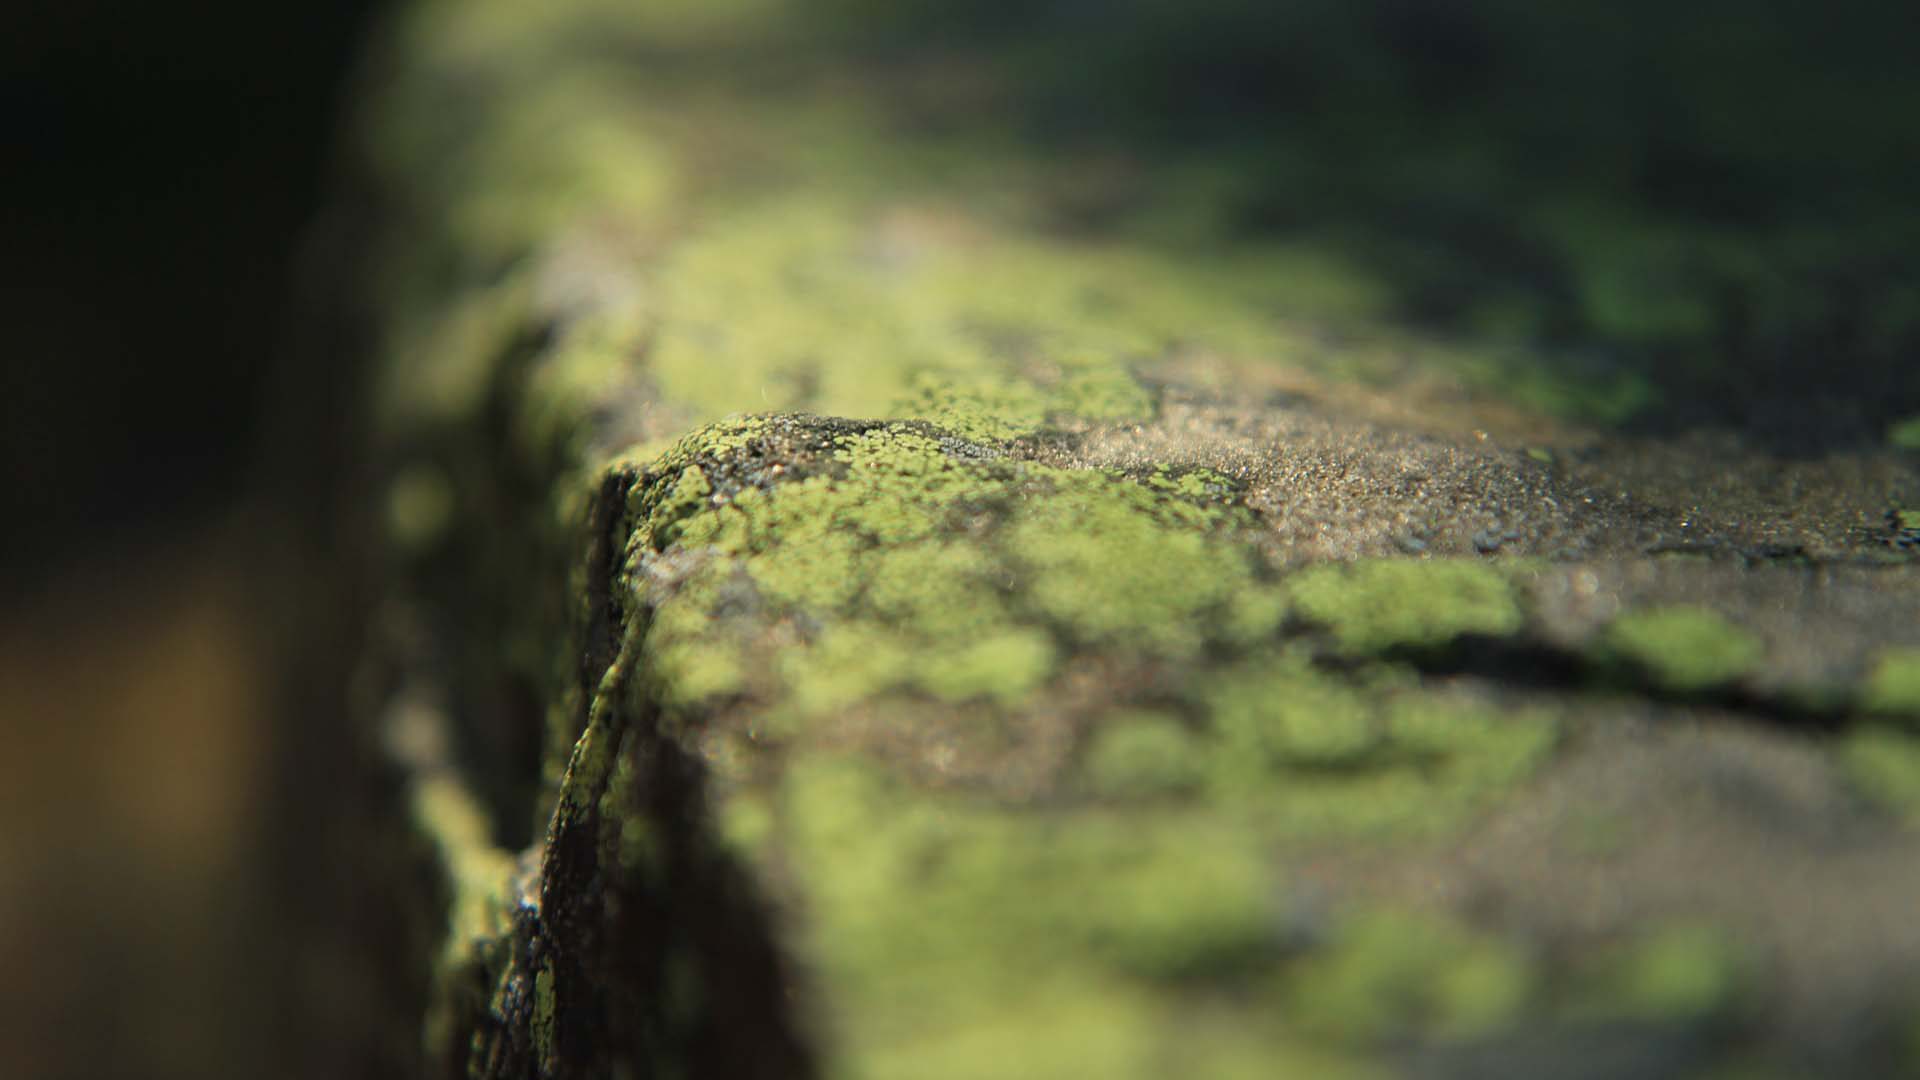 Using depth of field too sparingly slither shallow depth of field lichen on rock